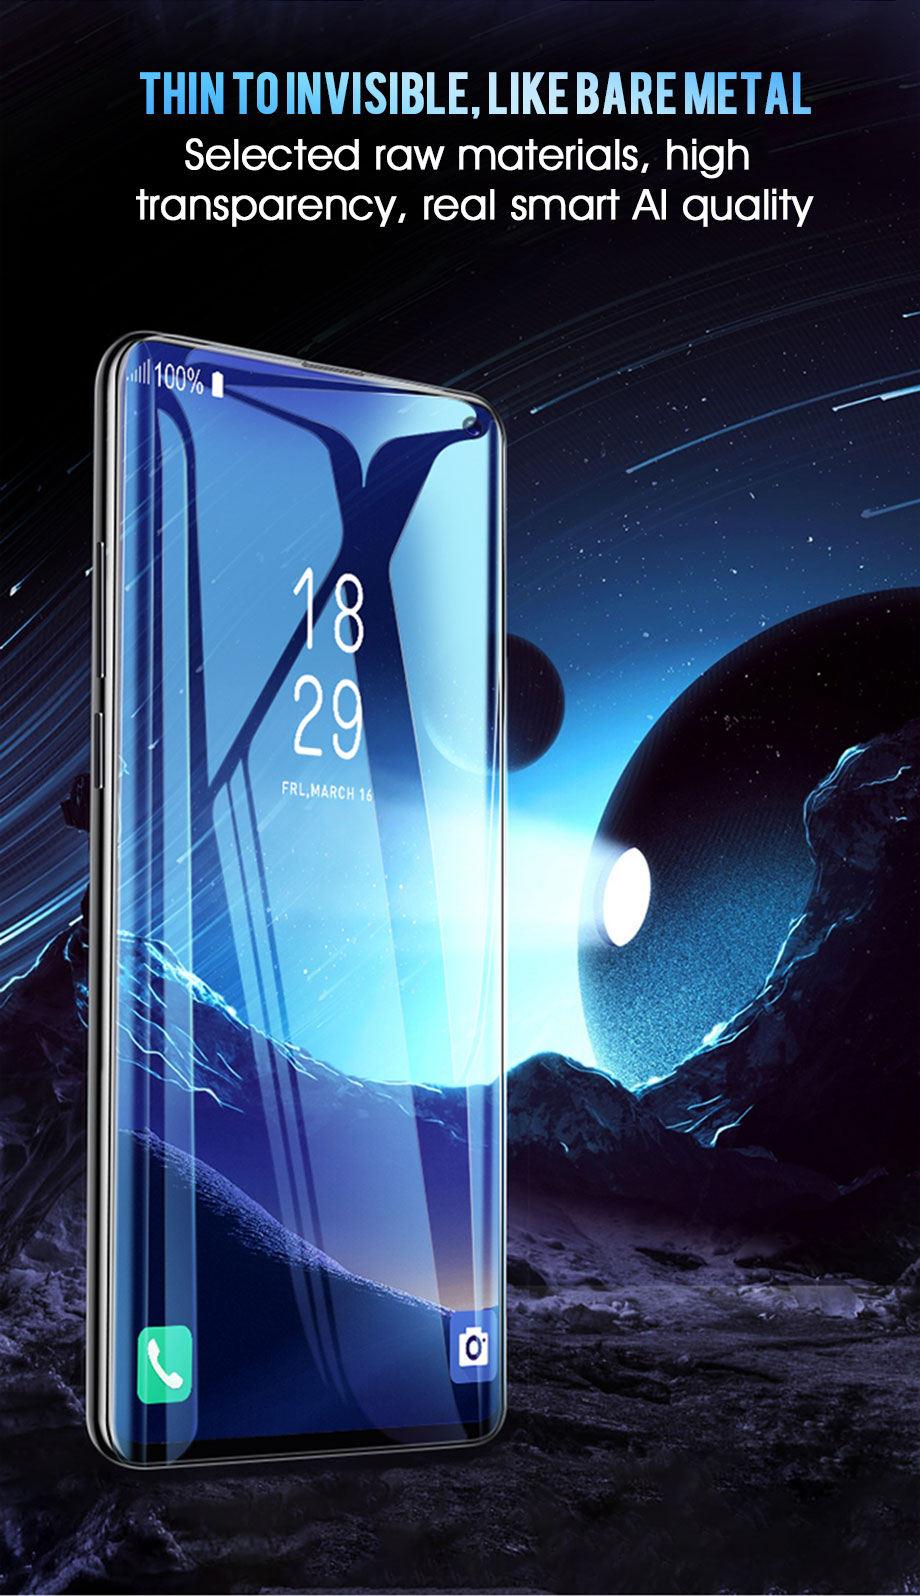 Bakeey-3D-Curved-Edge-Hydrogel-Screen-Protector-For-Samsung-Galaxy-S10Galaxy-S10-Plus-Support-Ultras-1452003-3